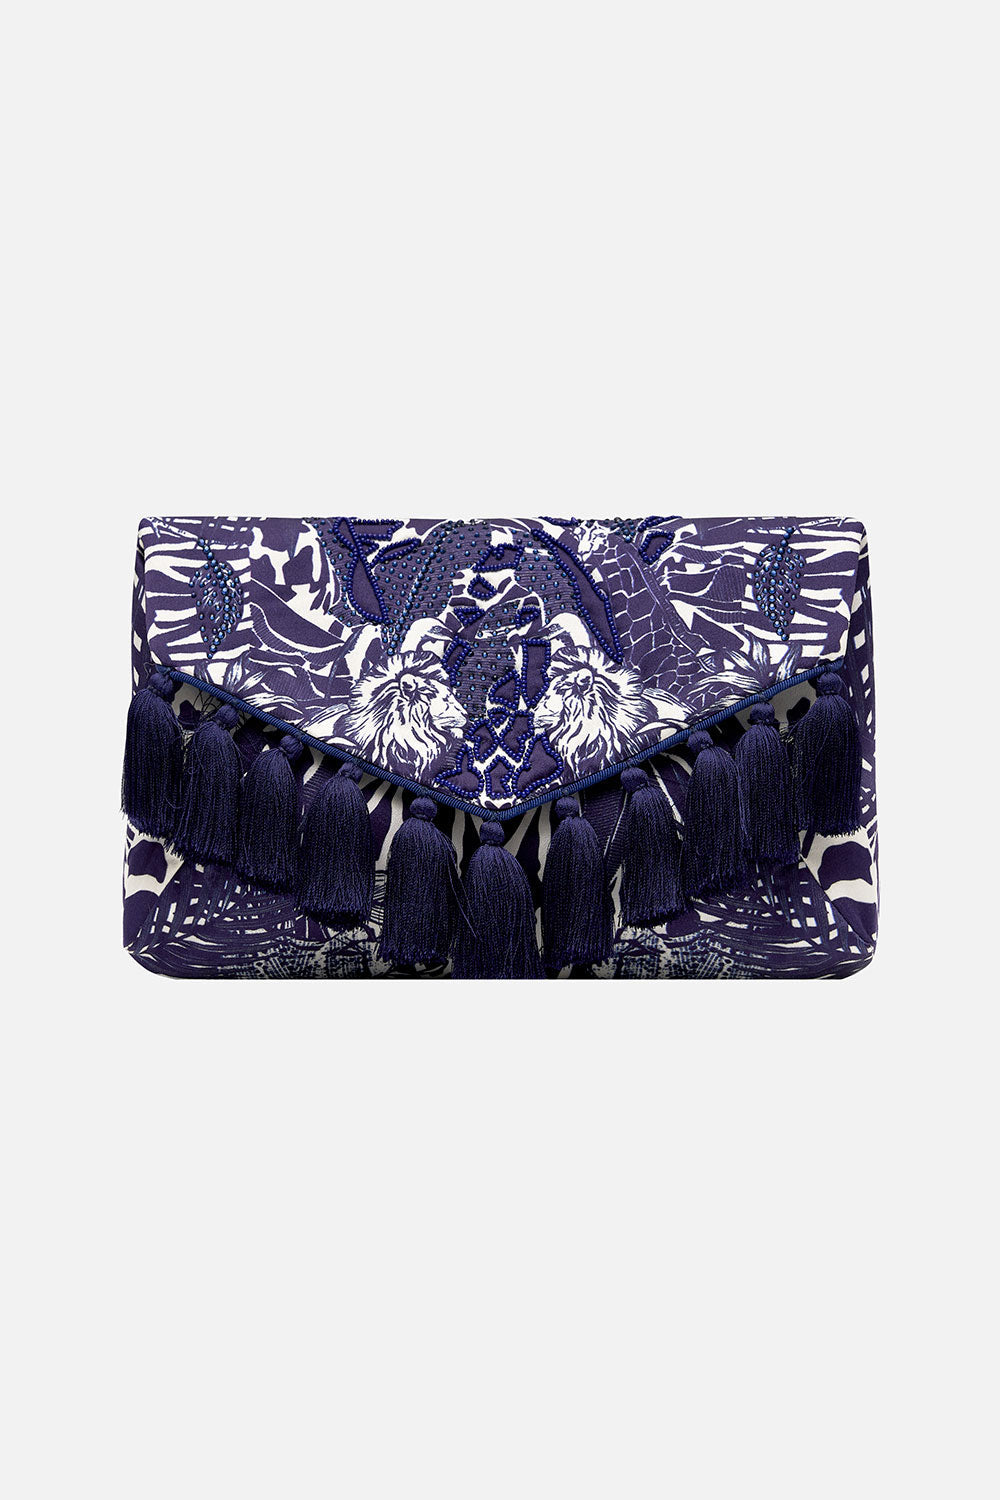 ENVELOPE CLUTCH WITH GUSSET WHERES YOUR HEAD AT